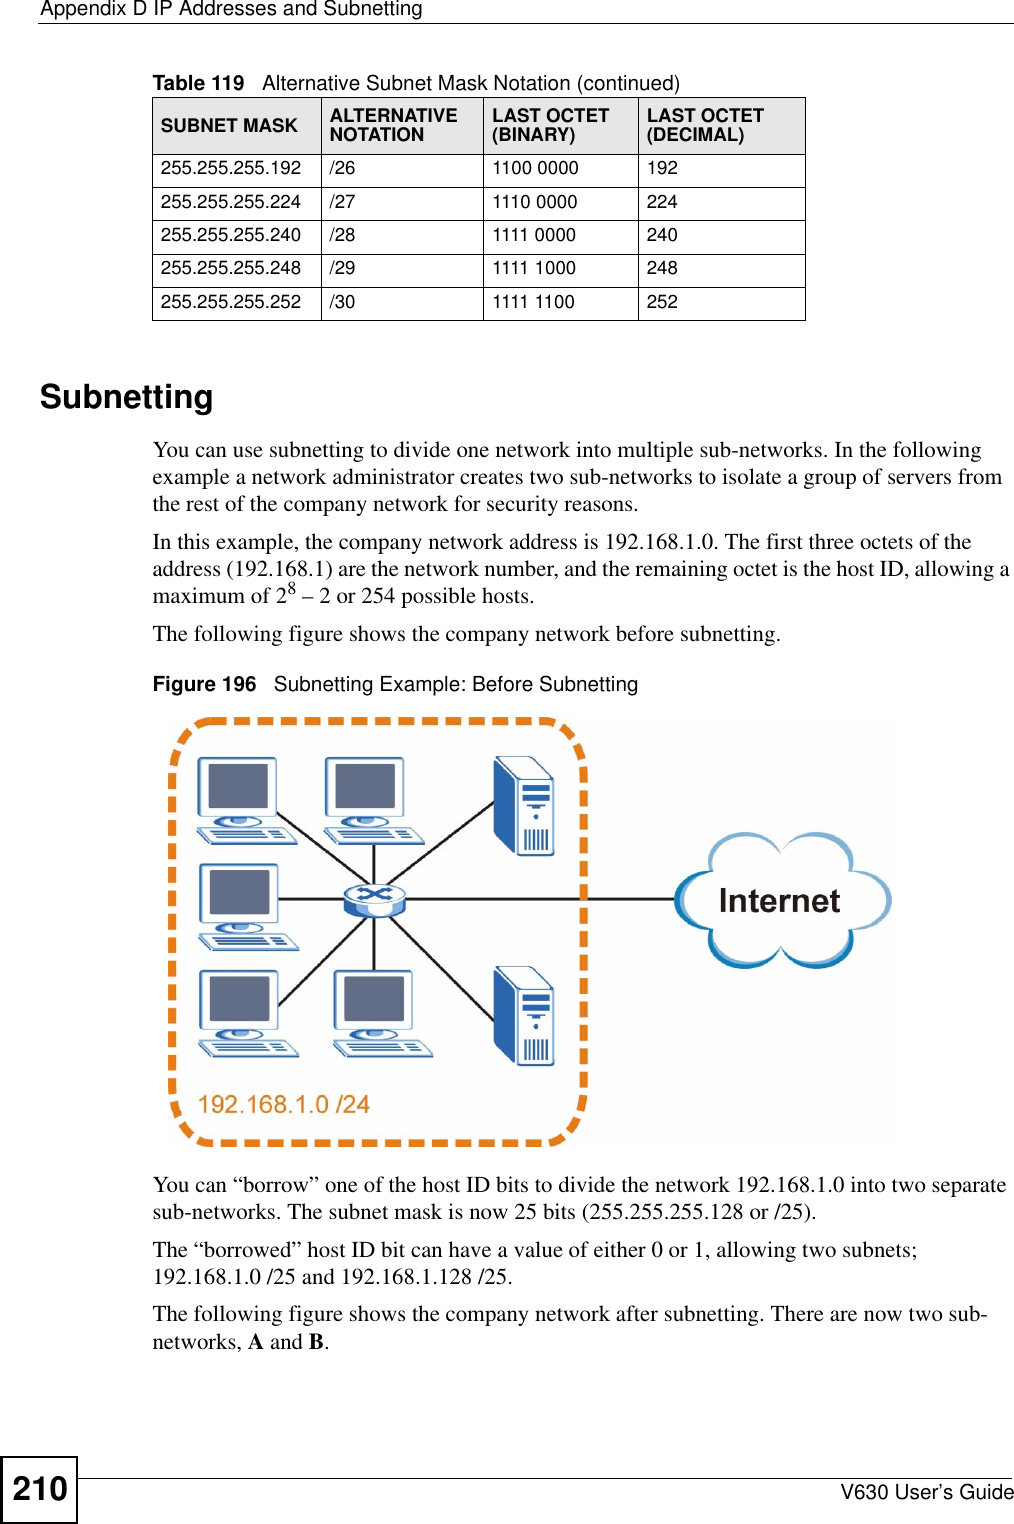 Appendix D IP Addresses and SubnettingV630 User’s Guide210SubnettingYou can use subnetting to divide one network into multiple sub-networks. In the following example a network administrator creates two sub-networks to isolate a group of servers from the rest of the company network for security reasons.In this example, the company network address is 192.168.1.0. The first three octets of the address (192.168.1) are the network number, and the remaining octet is the host ID, allowing a maximum of 28 – 2 or 254 possible hosts.The following figure shows the company network before subnetting.  Figure 196   Subnetting Example: Before SubnettingYou can “borrow” one of the host ID bits to divide the network 192.168.1.0 into two separate sub-networks. The subnet mask is now 25 bits (255.255.255.128 or /25).The “borrowed” host ID bit can have a value of either 0 or 1, allowing two subnets; 192.168.1.0 /25 and 192.168.1.128 /25. The following figure shows the company network after subnetting. There are now two sub-networks, A and B. 255.255.255.192 /26 1100 0000 192255.255.255.224 /27 1110 0000 224255.255.255.240 /28 1111 0000 240255.255.255.248 /29 1111 1000 248255.255.255.252 /30 1111 1100 252Table 119   Alternative Subnet Mask Notation (continued)SUBNET MASK ALTERNATIVE NOTATION LAST OCTET (BINARY) LAST OCTET (DECIMAL)